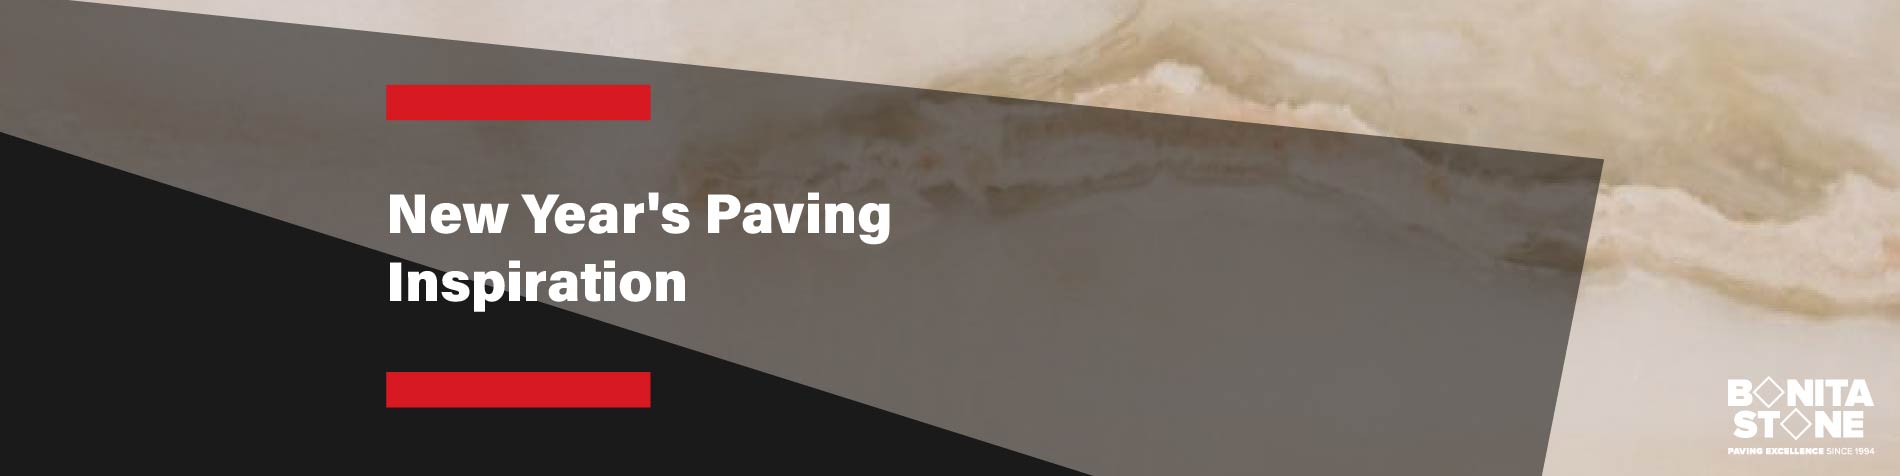 new-years-paving-inspiration-banner